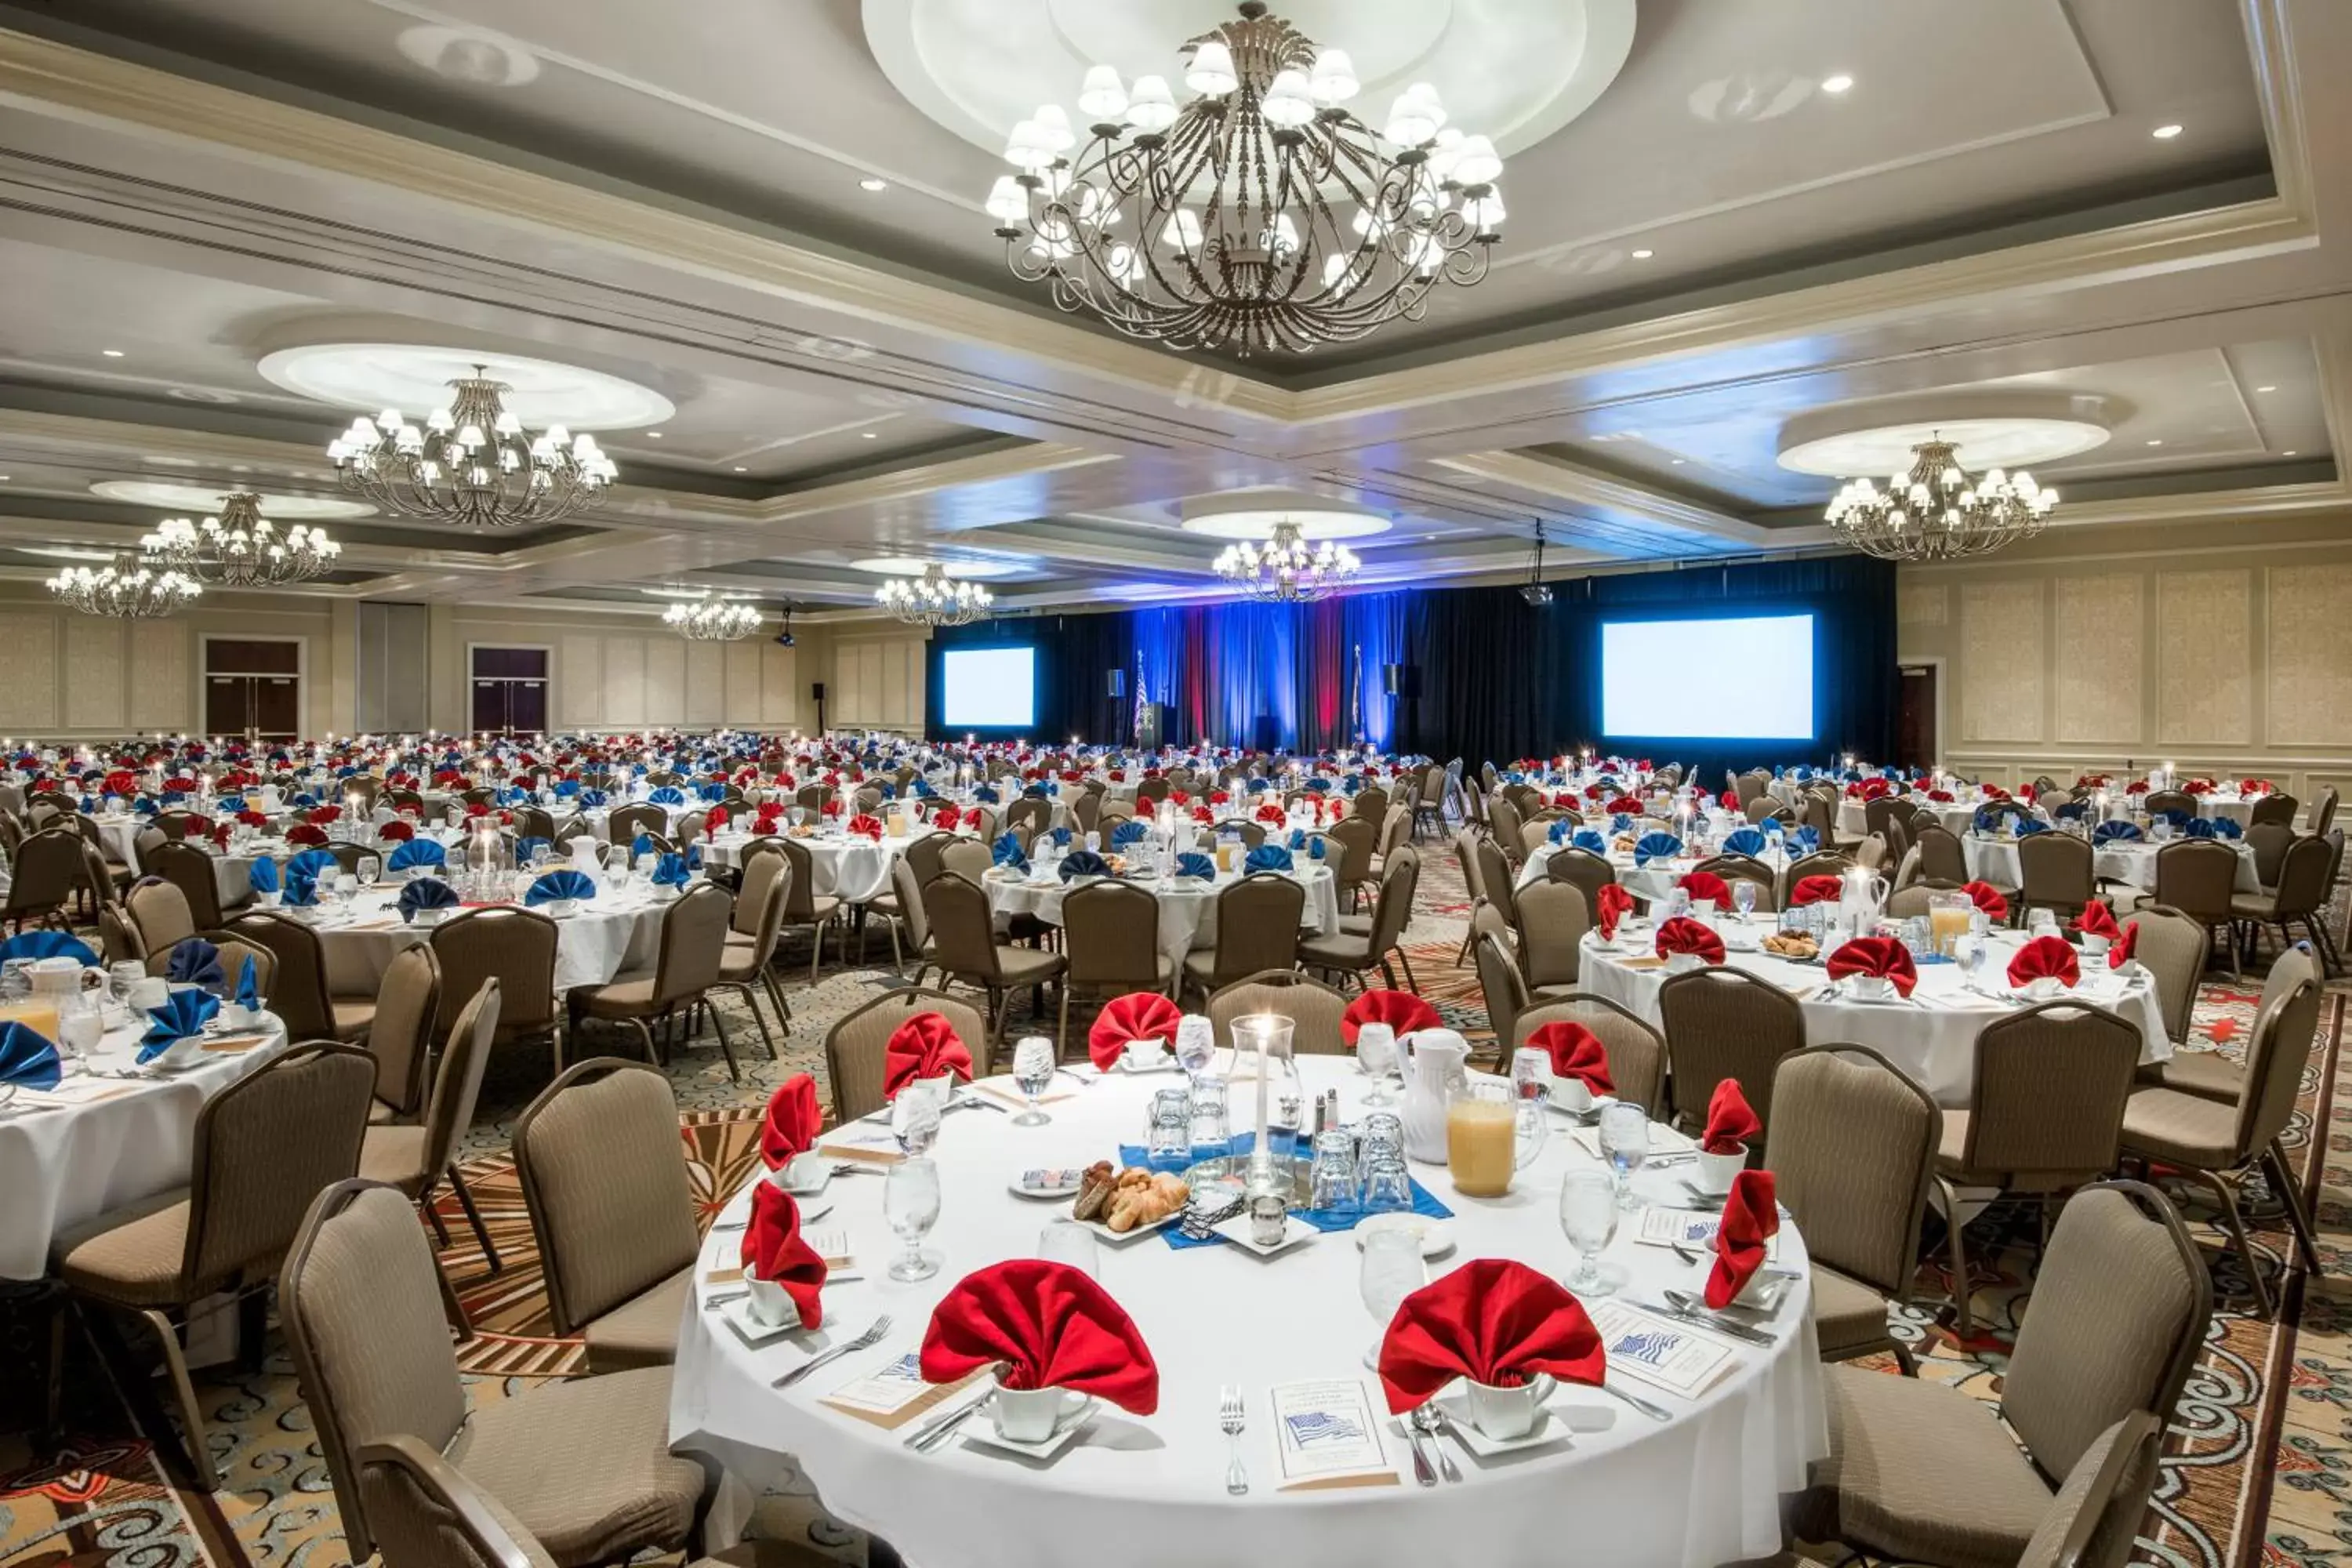 Banquet/Function facilities, Banquet Facilities in The Antlers, A Wyndham Hotel